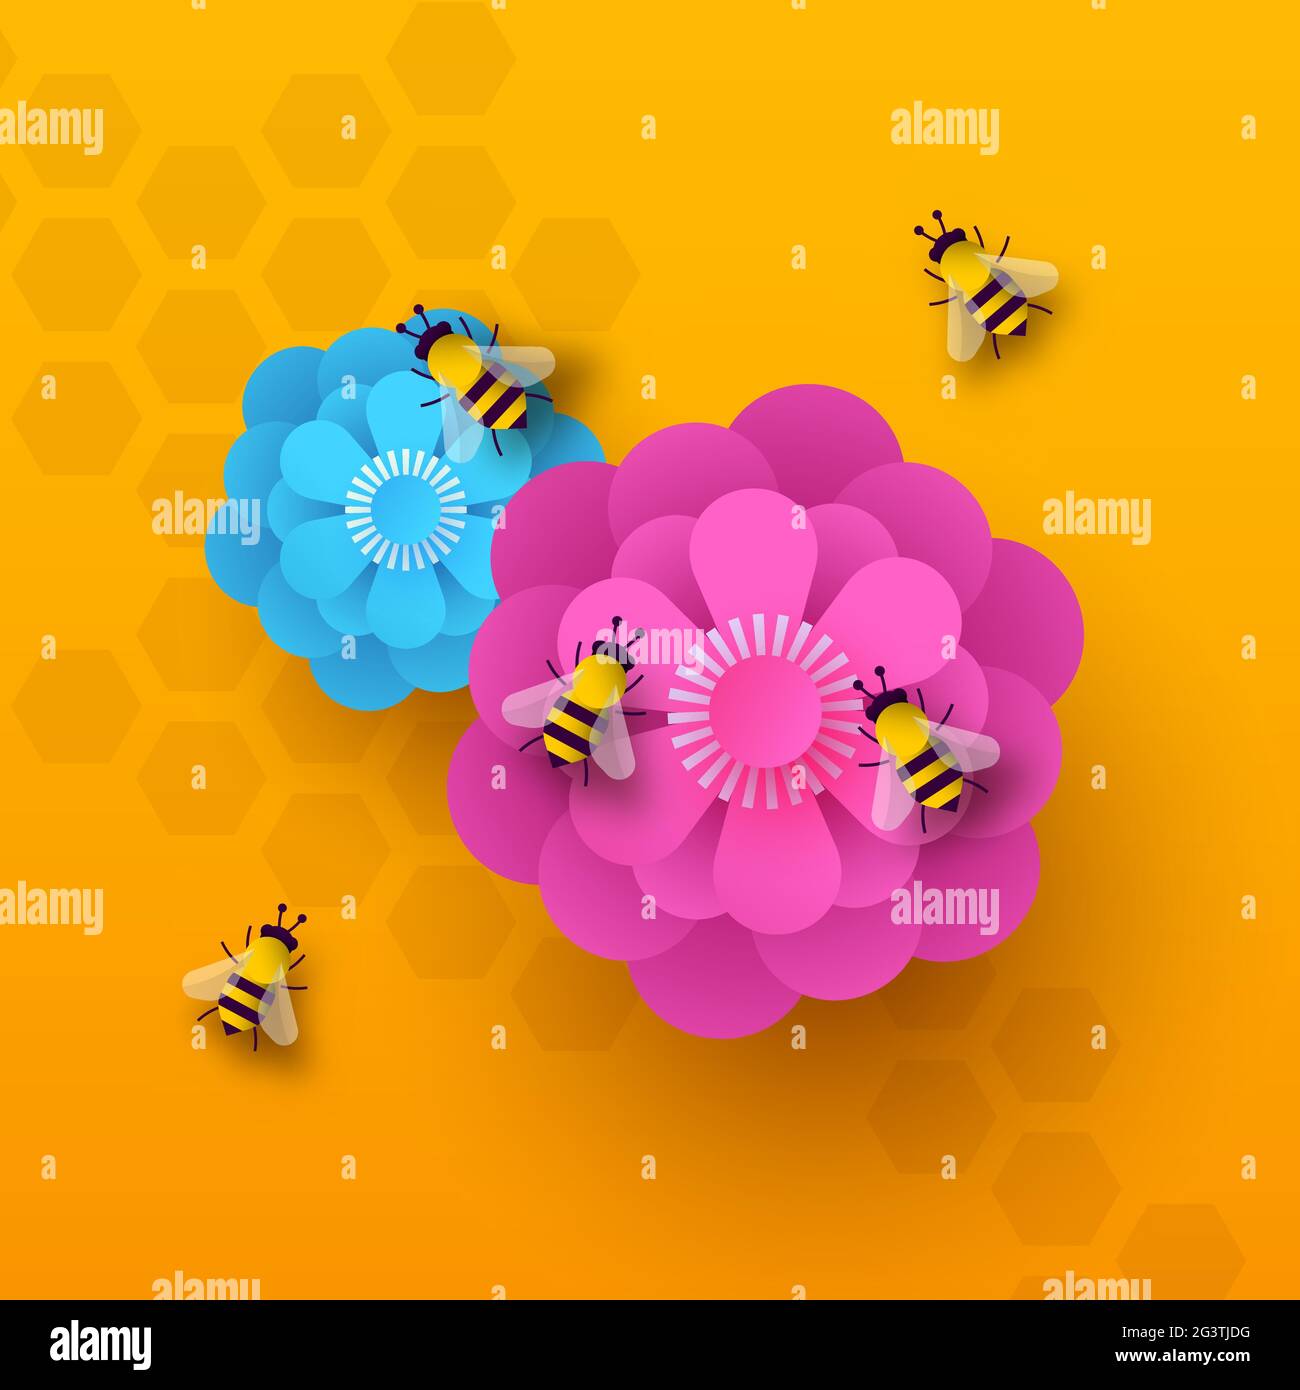 Floral spring illustration background of paper cut flowers and bee insects in modern 3d papercut style for season event or animal conservation. Stock Vector